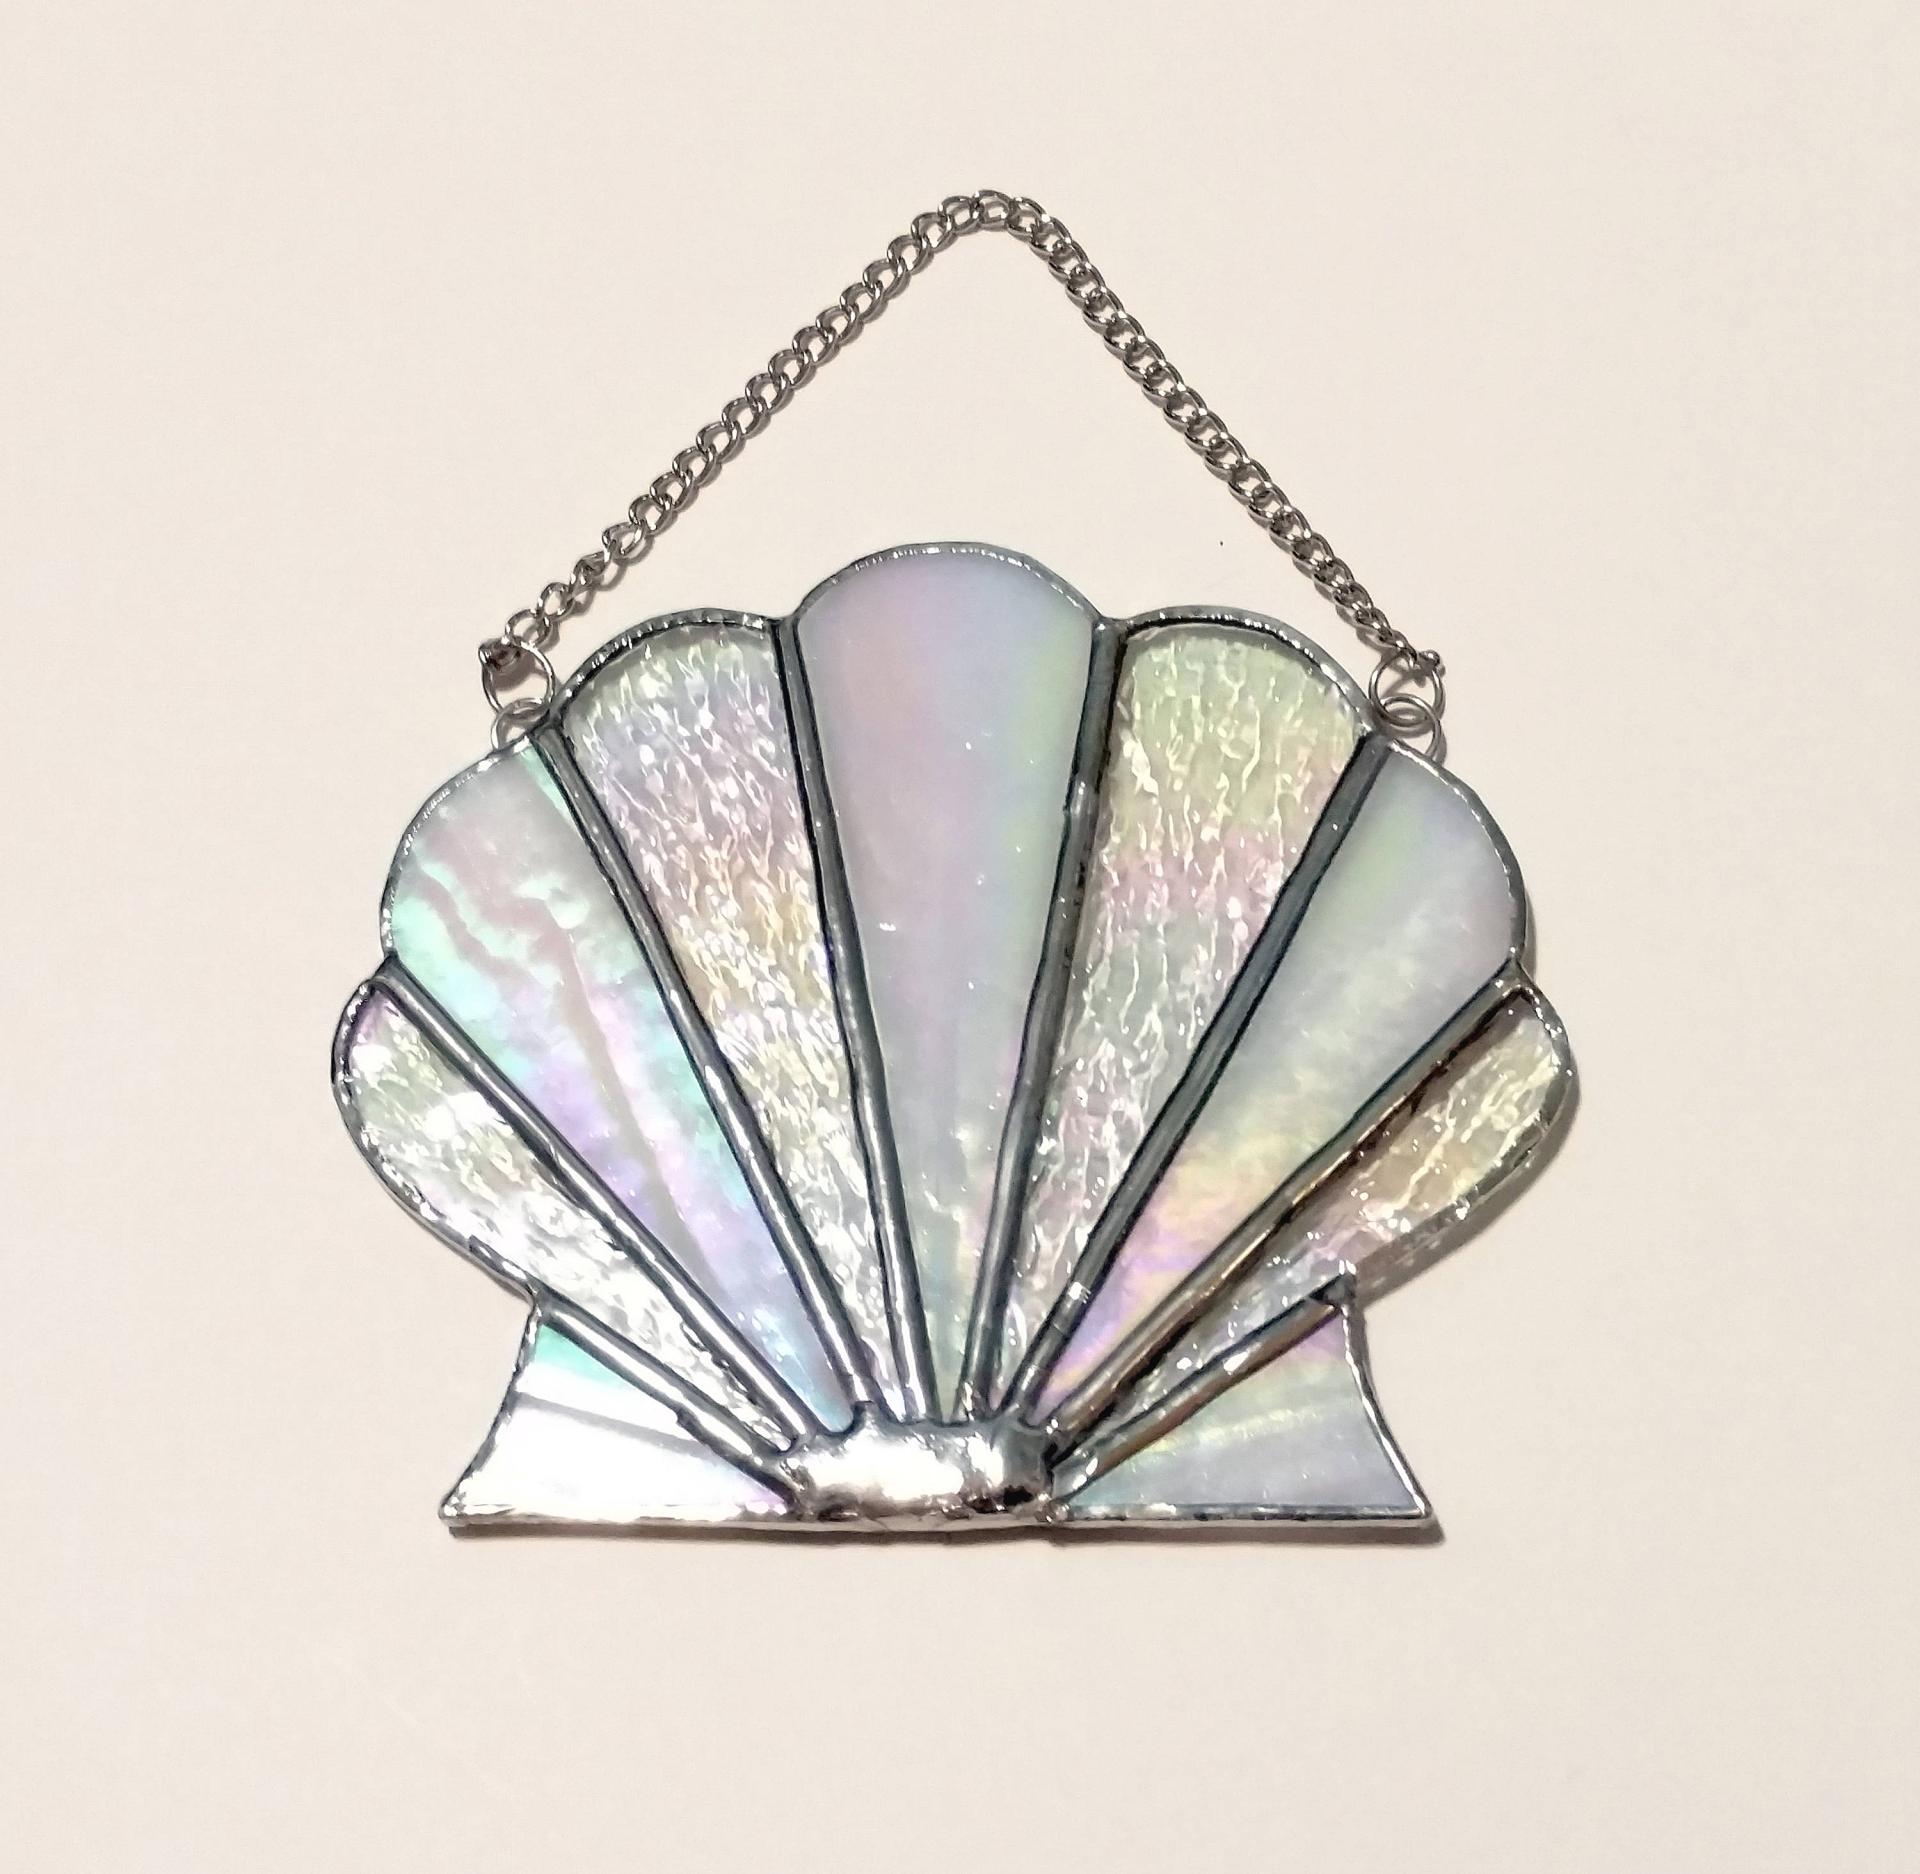 Iridescent Scallop Seashell Stained Glass & Beveled Window